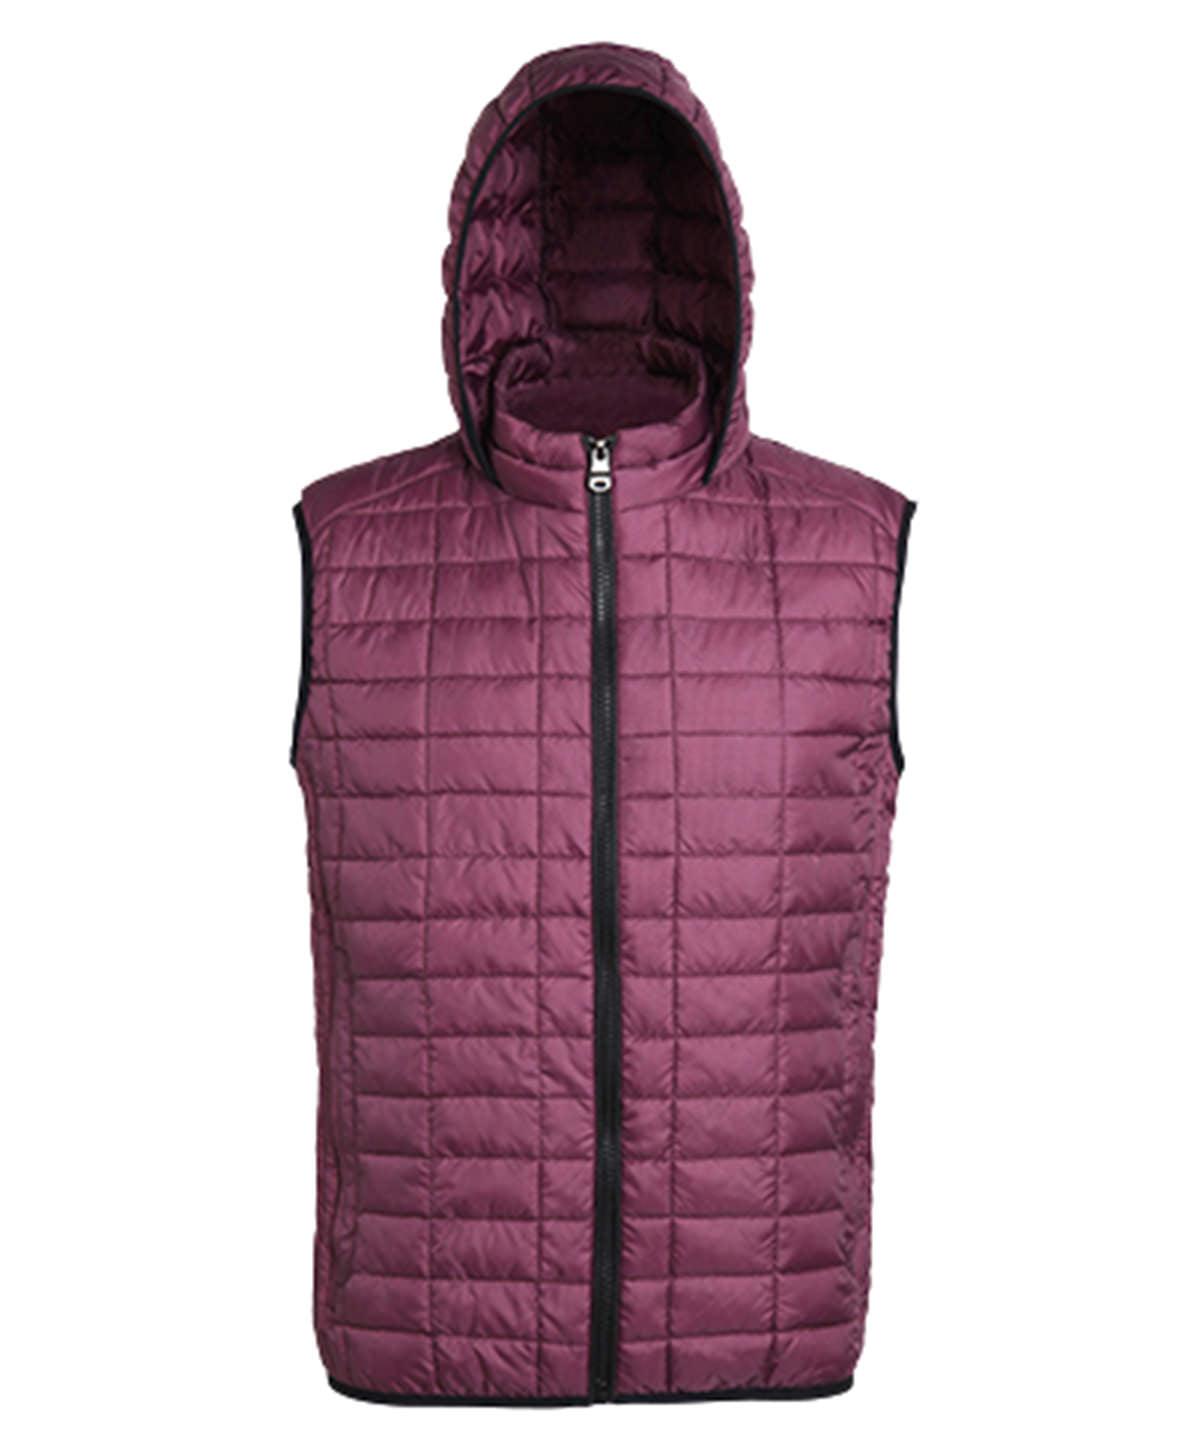 Mulberry* - Honeycomb hooded gilet Body Warmers 2786 Gilets and Bodywarmers, Jackets & Coats, Outdoor Dining, Padded & Insulation, Padded Perfection, Plus Sizes, Raladeal - Recently Added, Rebrandable Schoolwear Centres